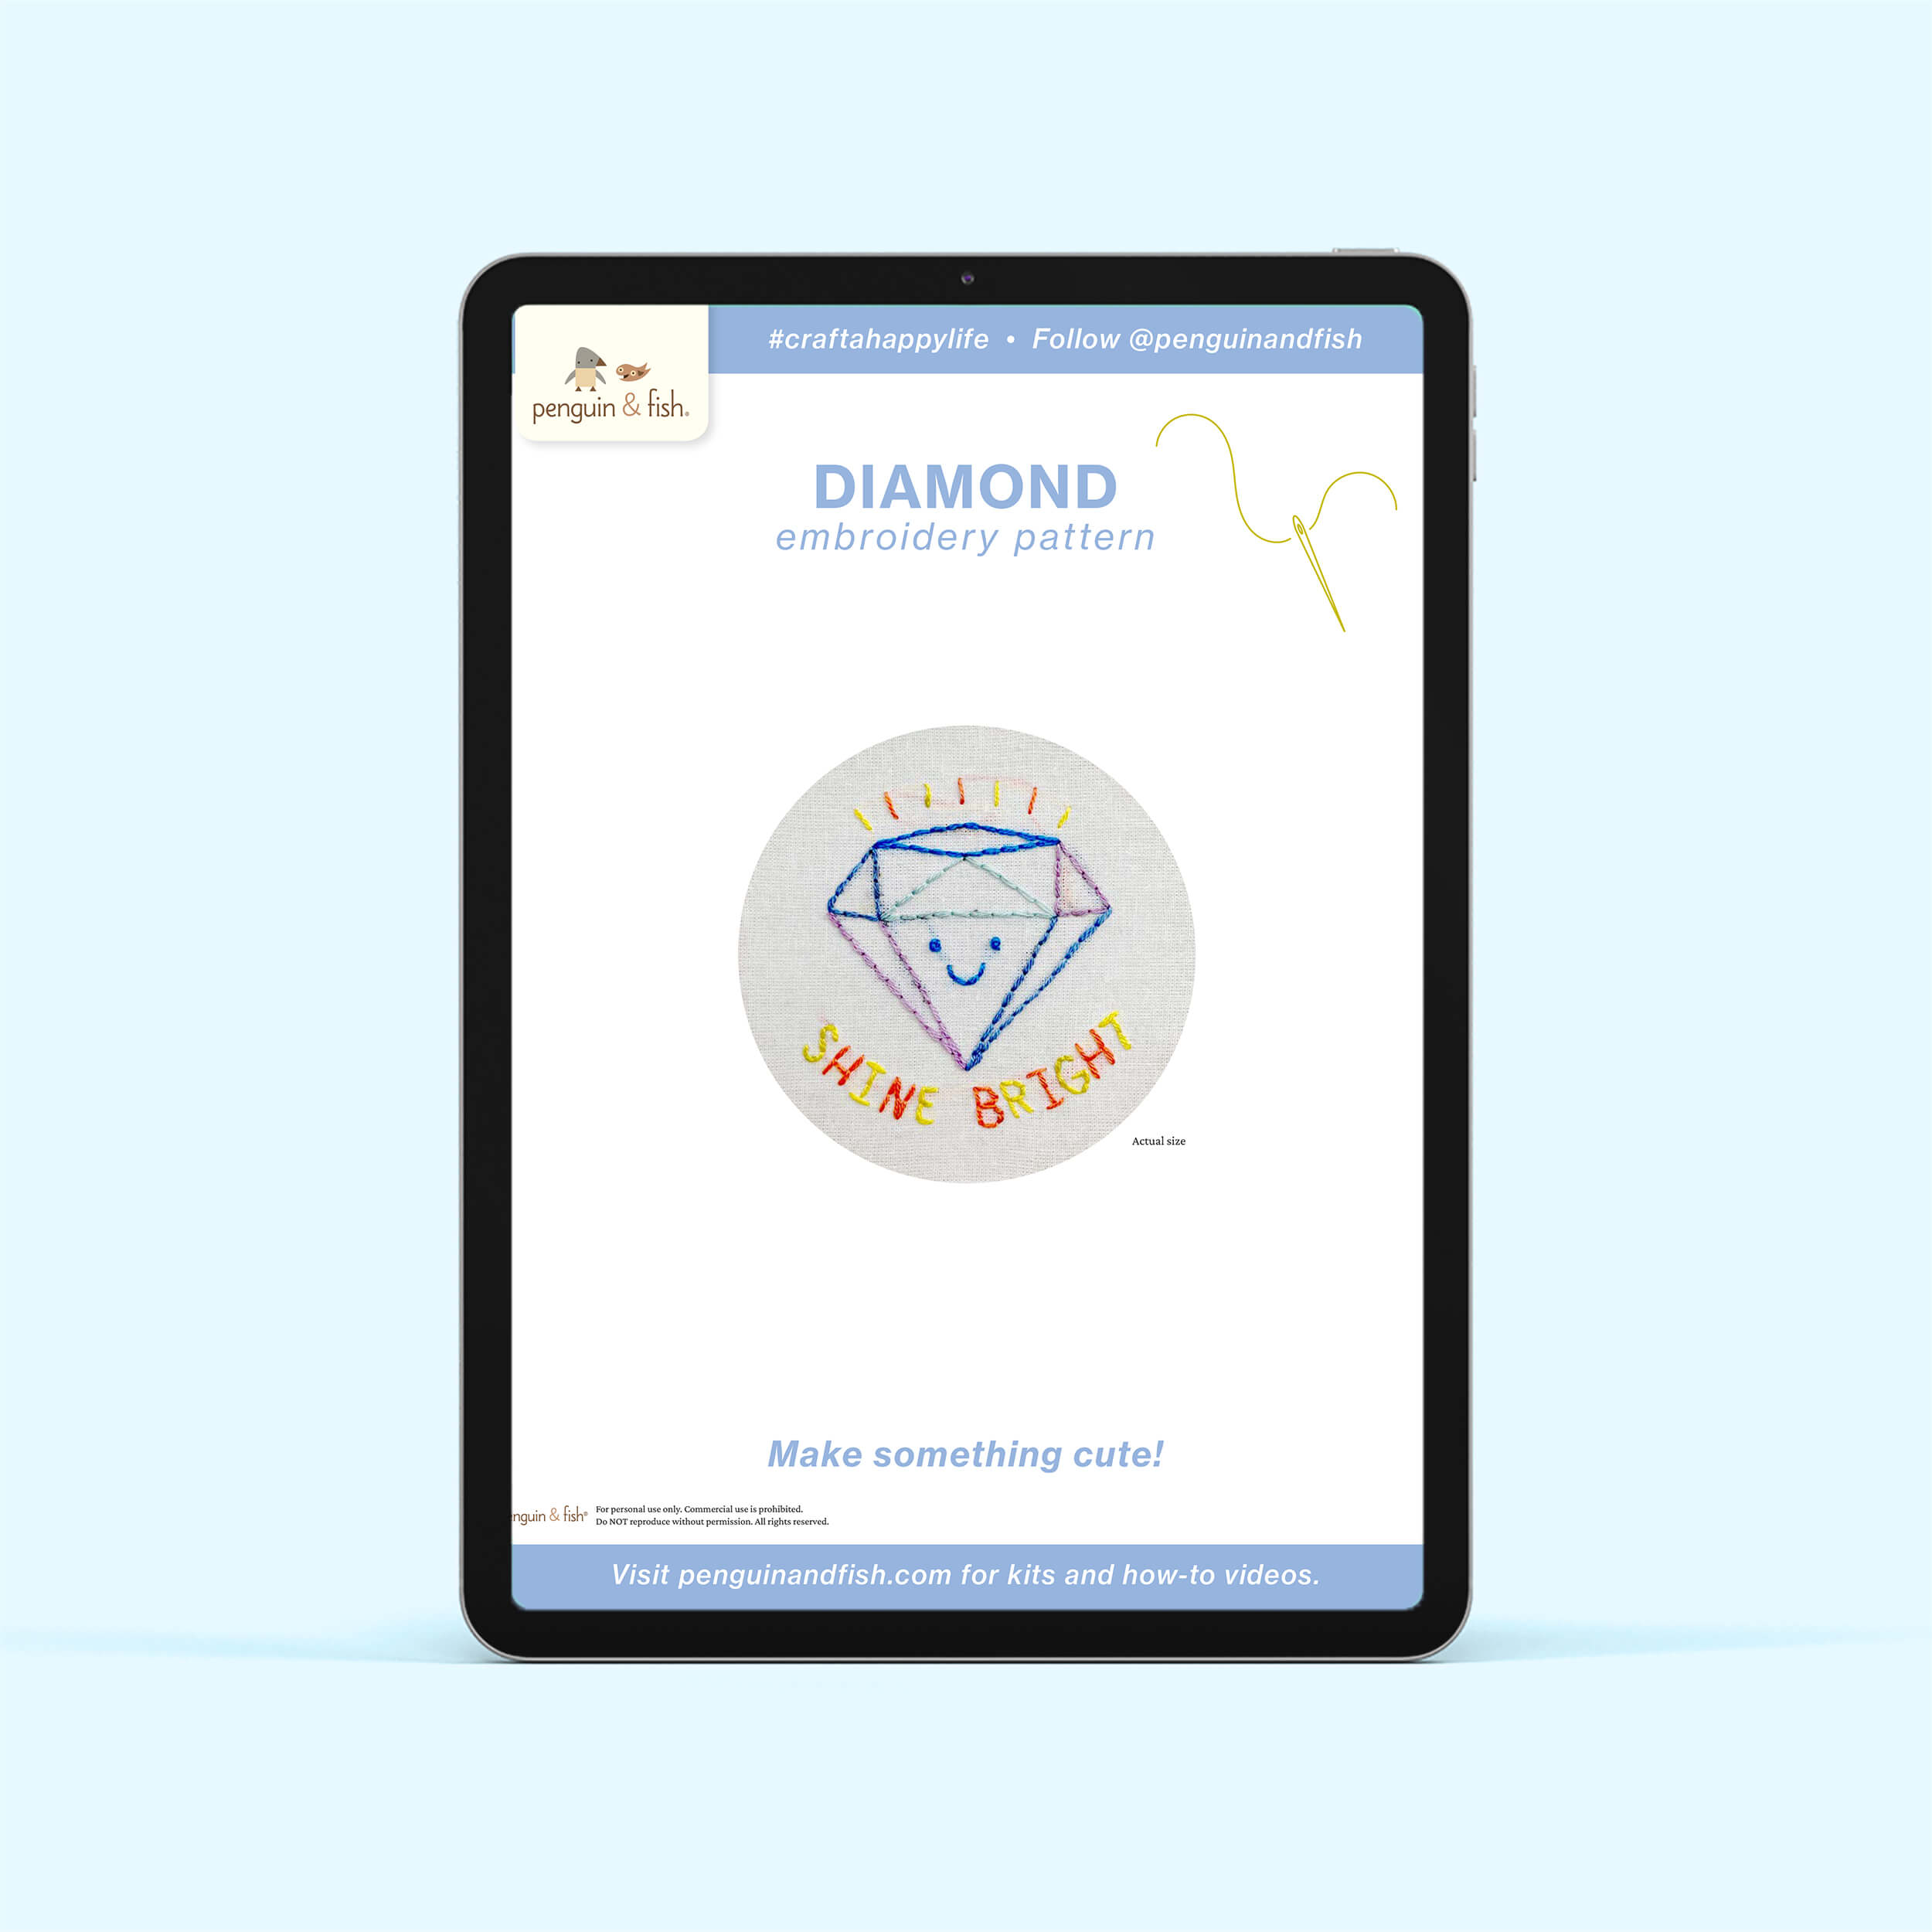 Diamond PDF embroidery pattern shown on a tablet